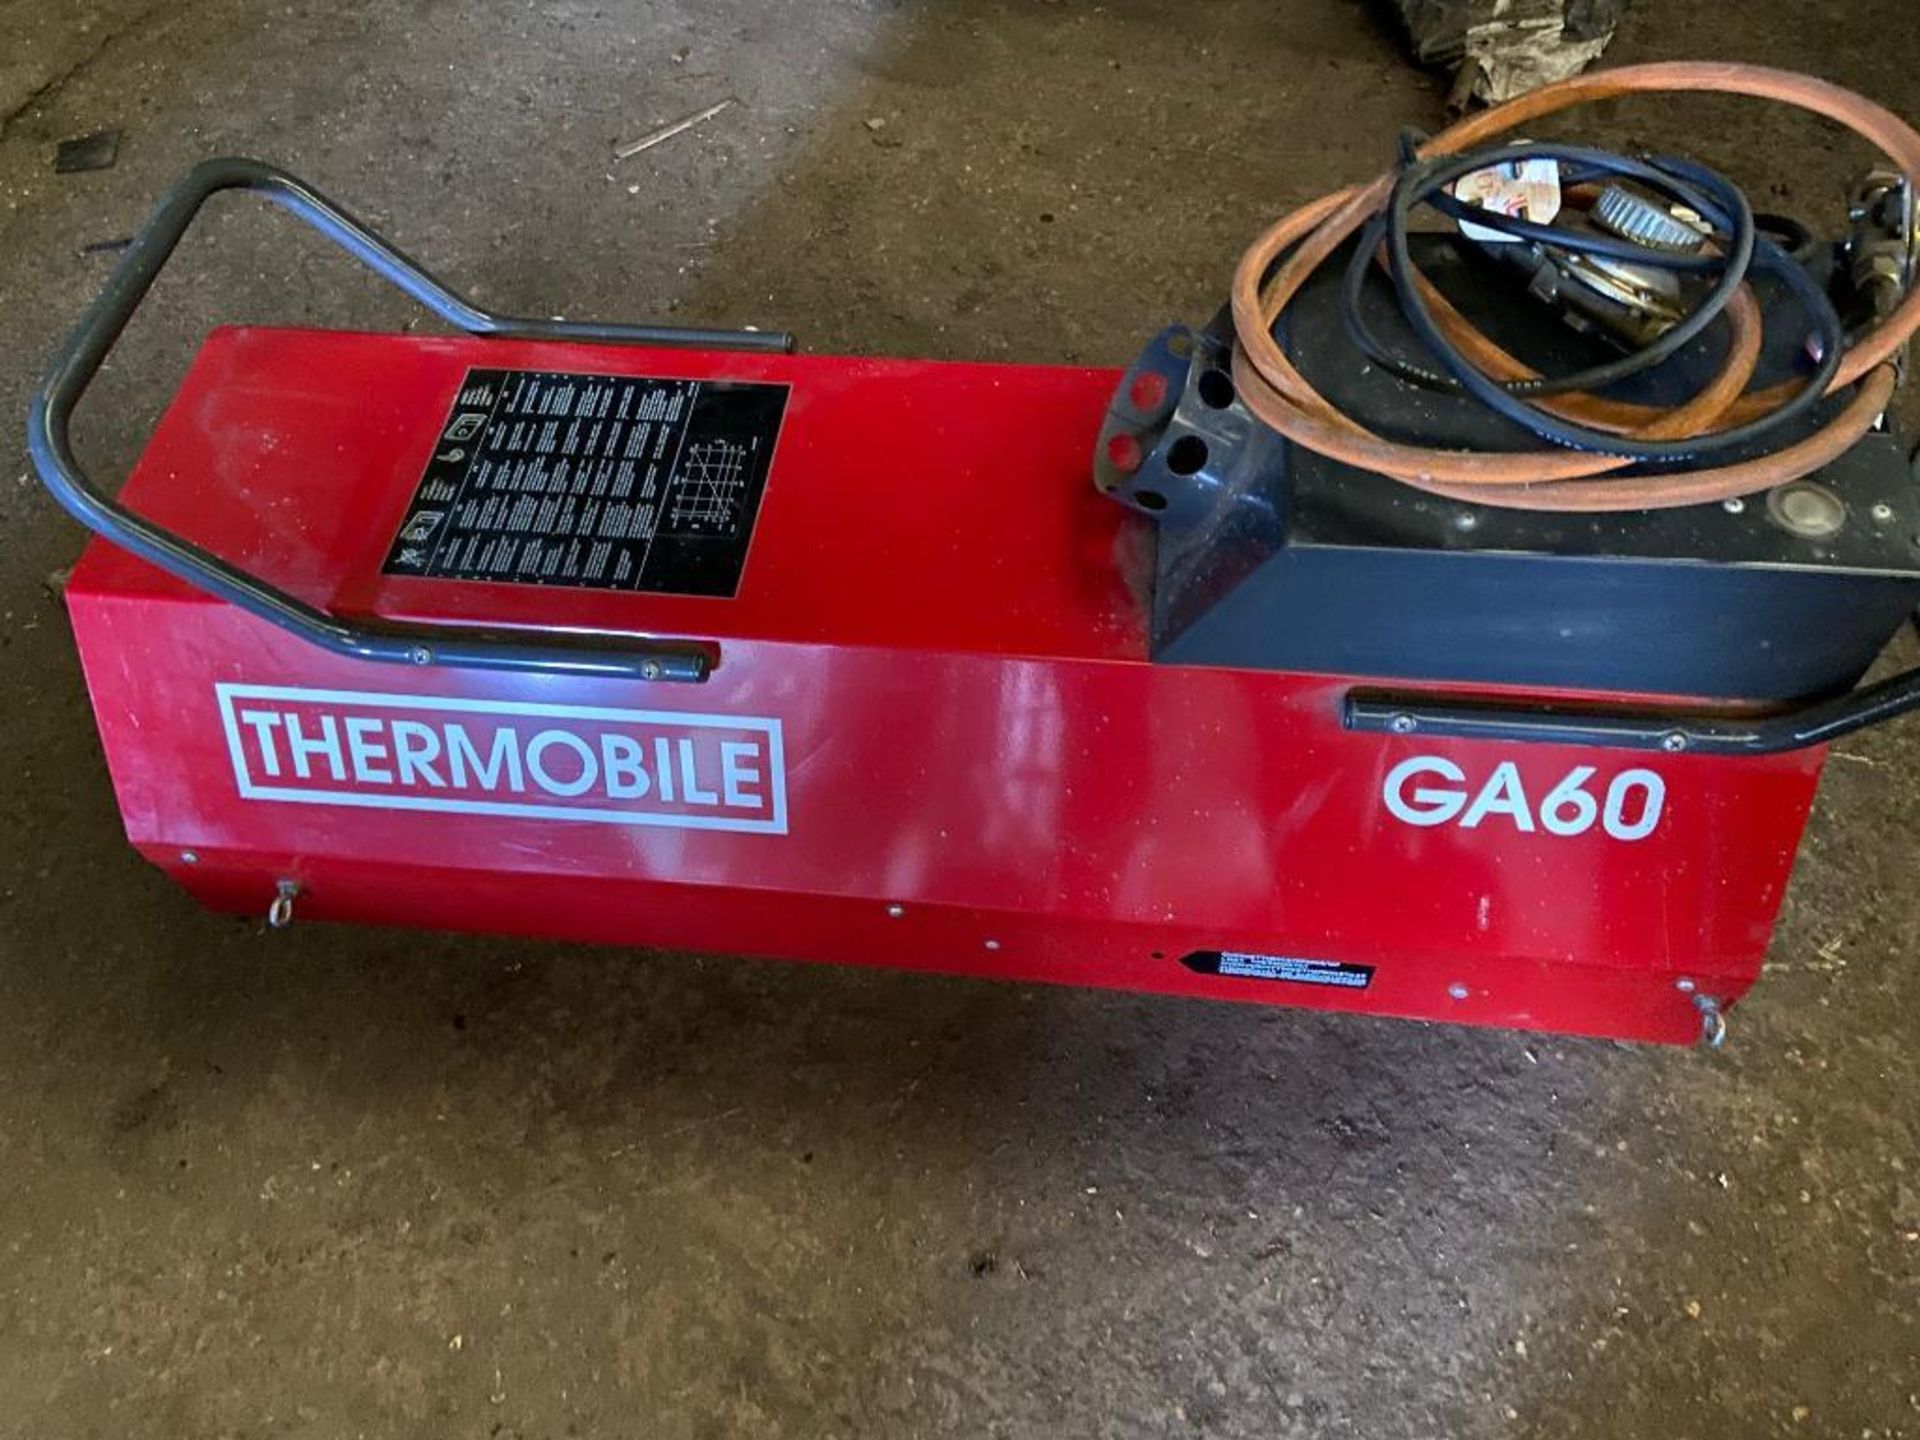 Thermobile GA60 gas space heater, single phase - Image 4 of 4